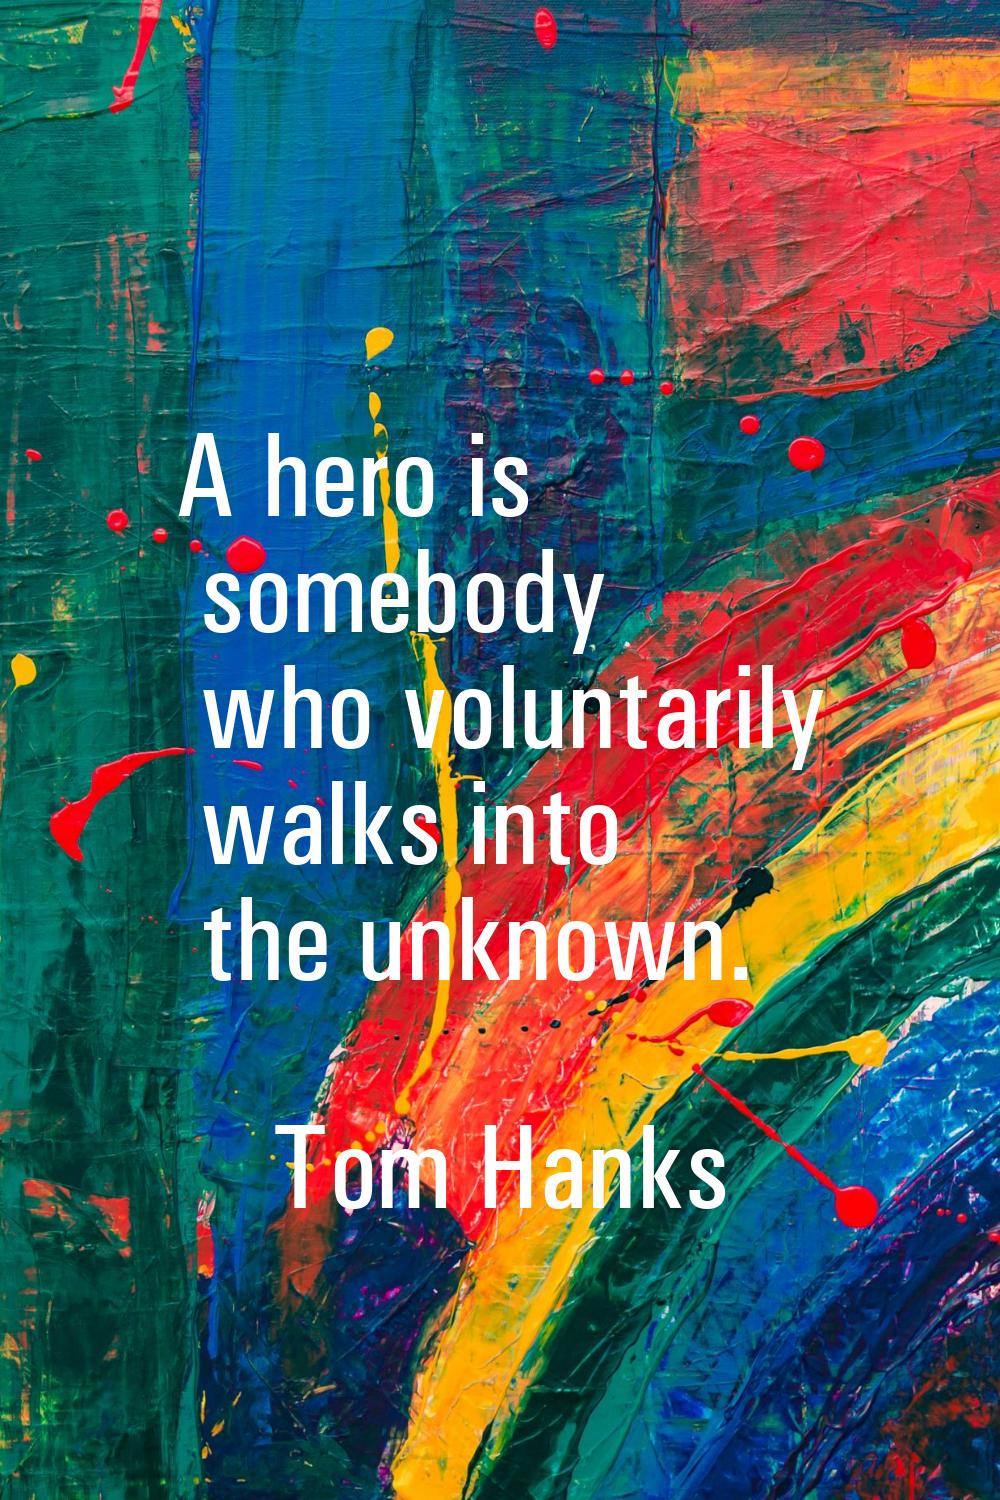 A hero is somebody who voluntarily walks into the unknown.